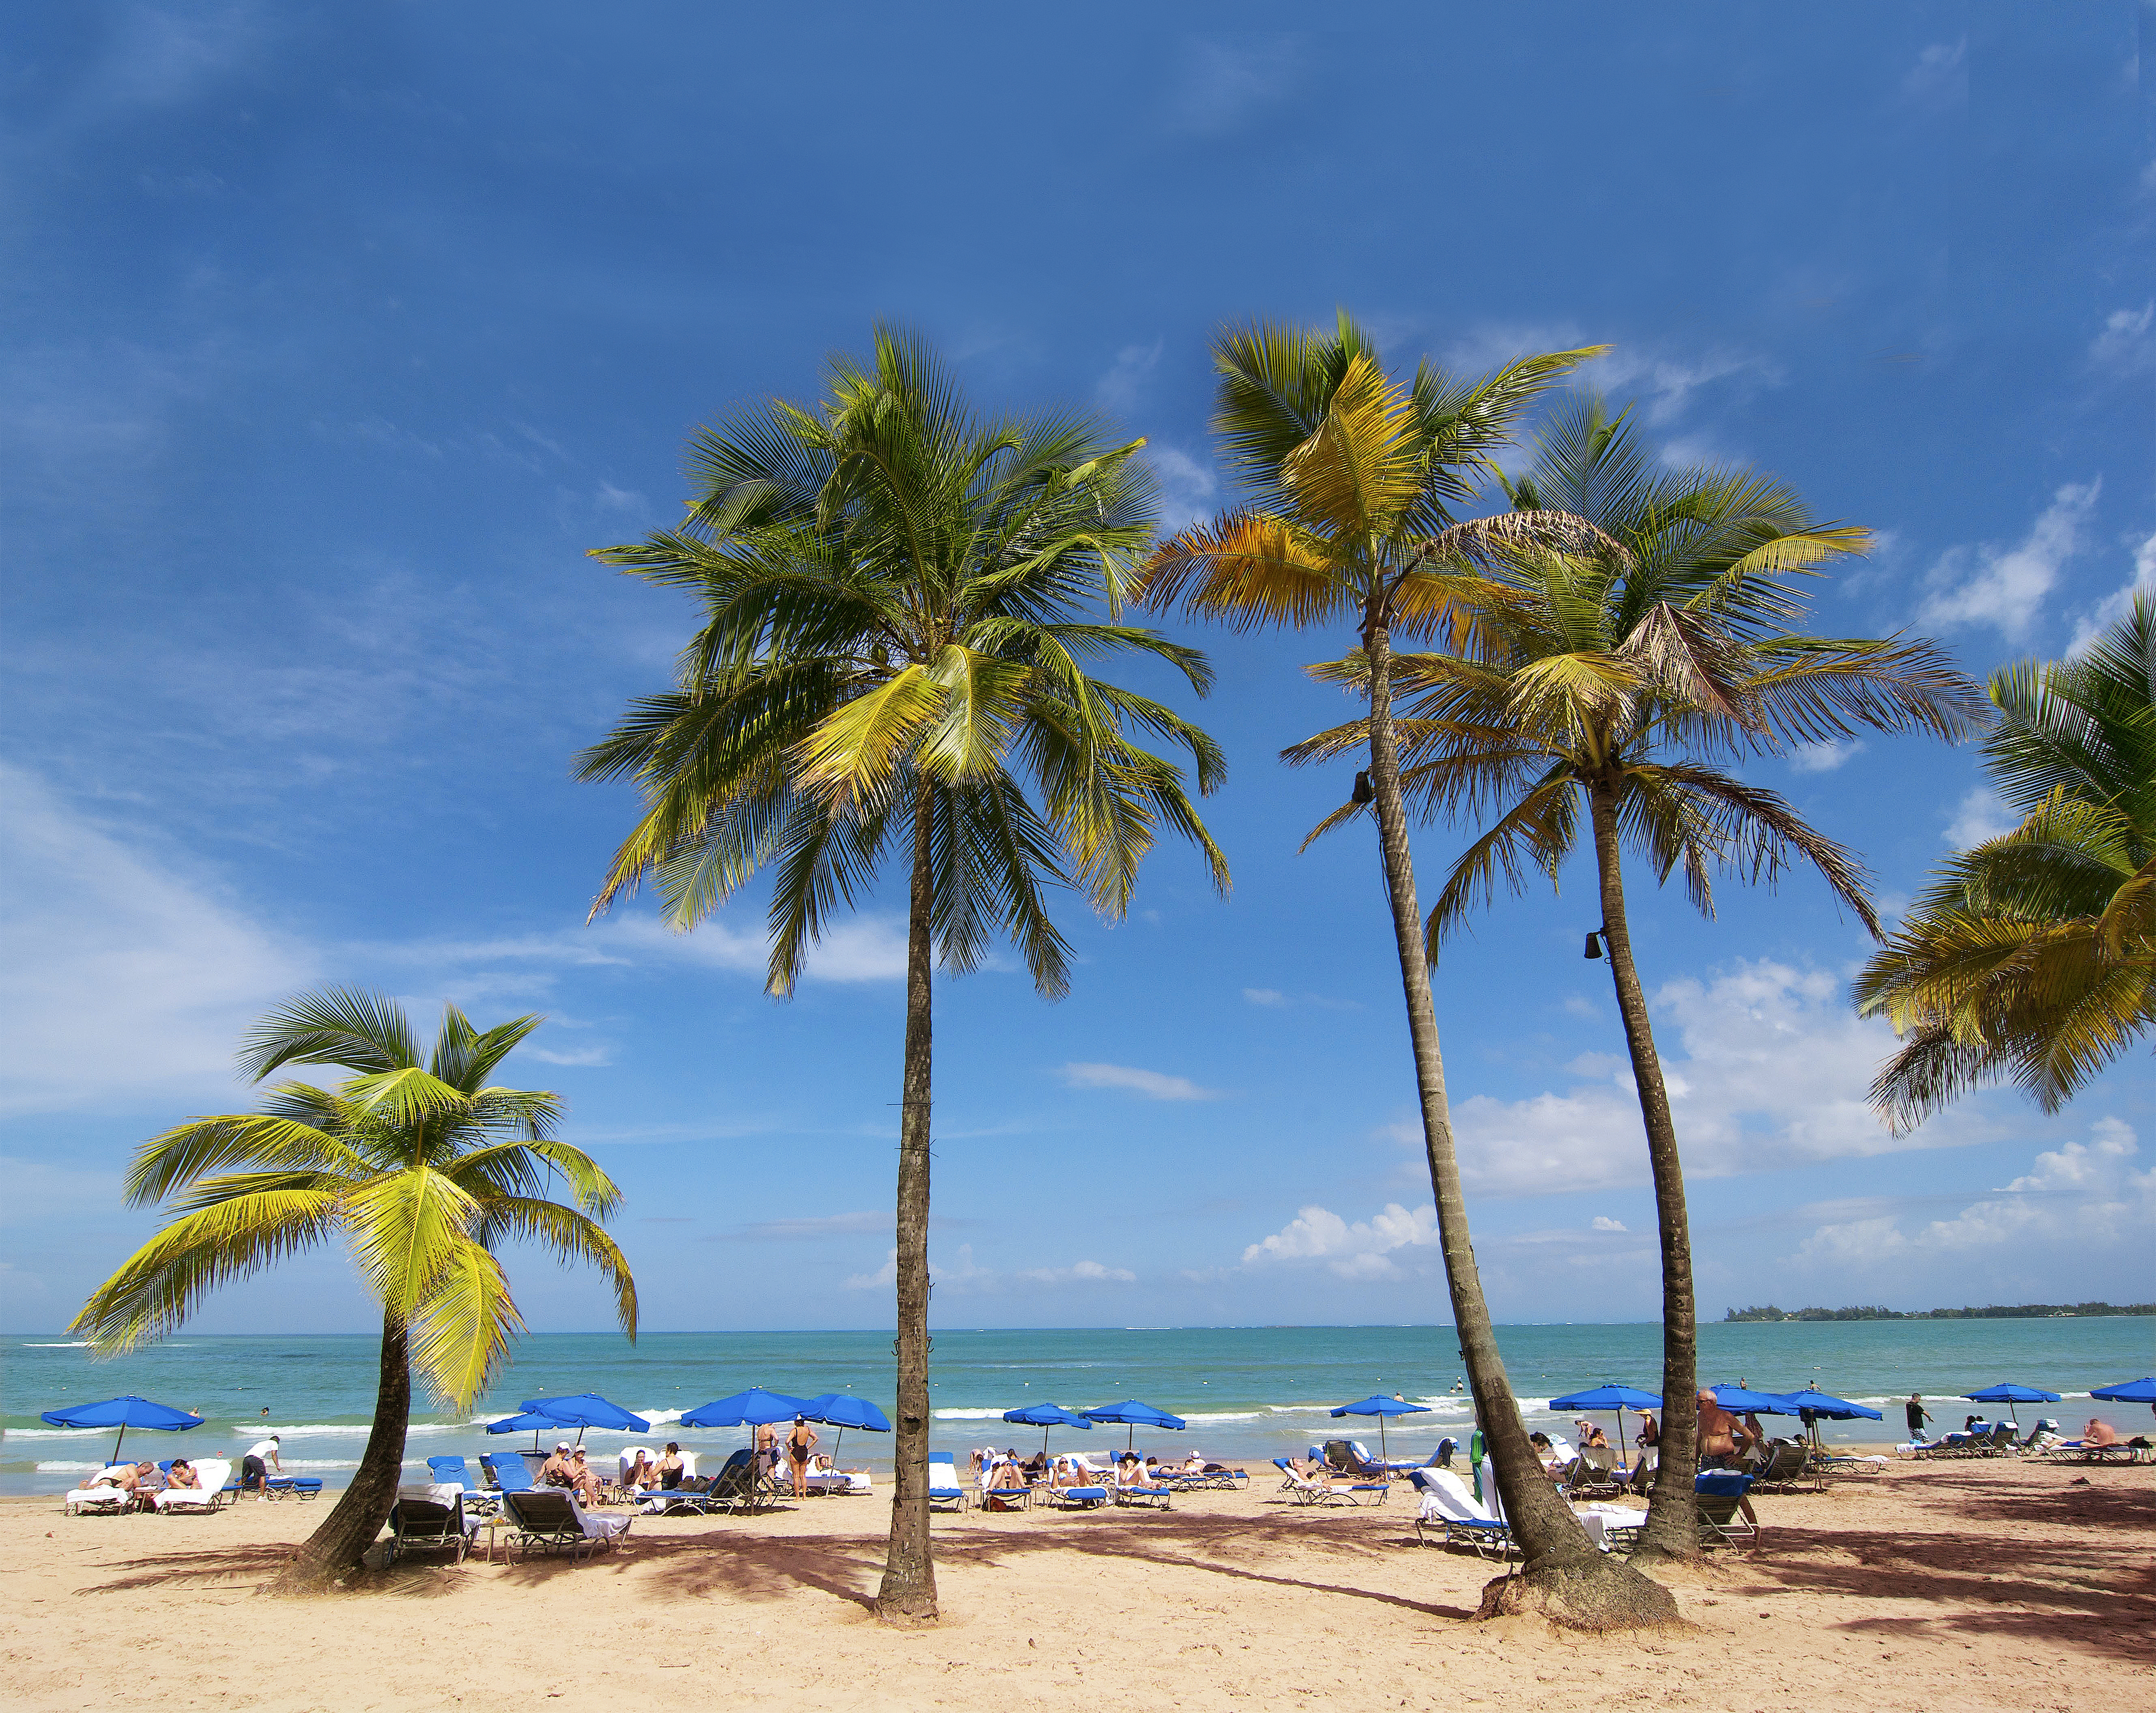 This palm-lined beach in San Juan, Puerto Rico, could be your holiday vista.